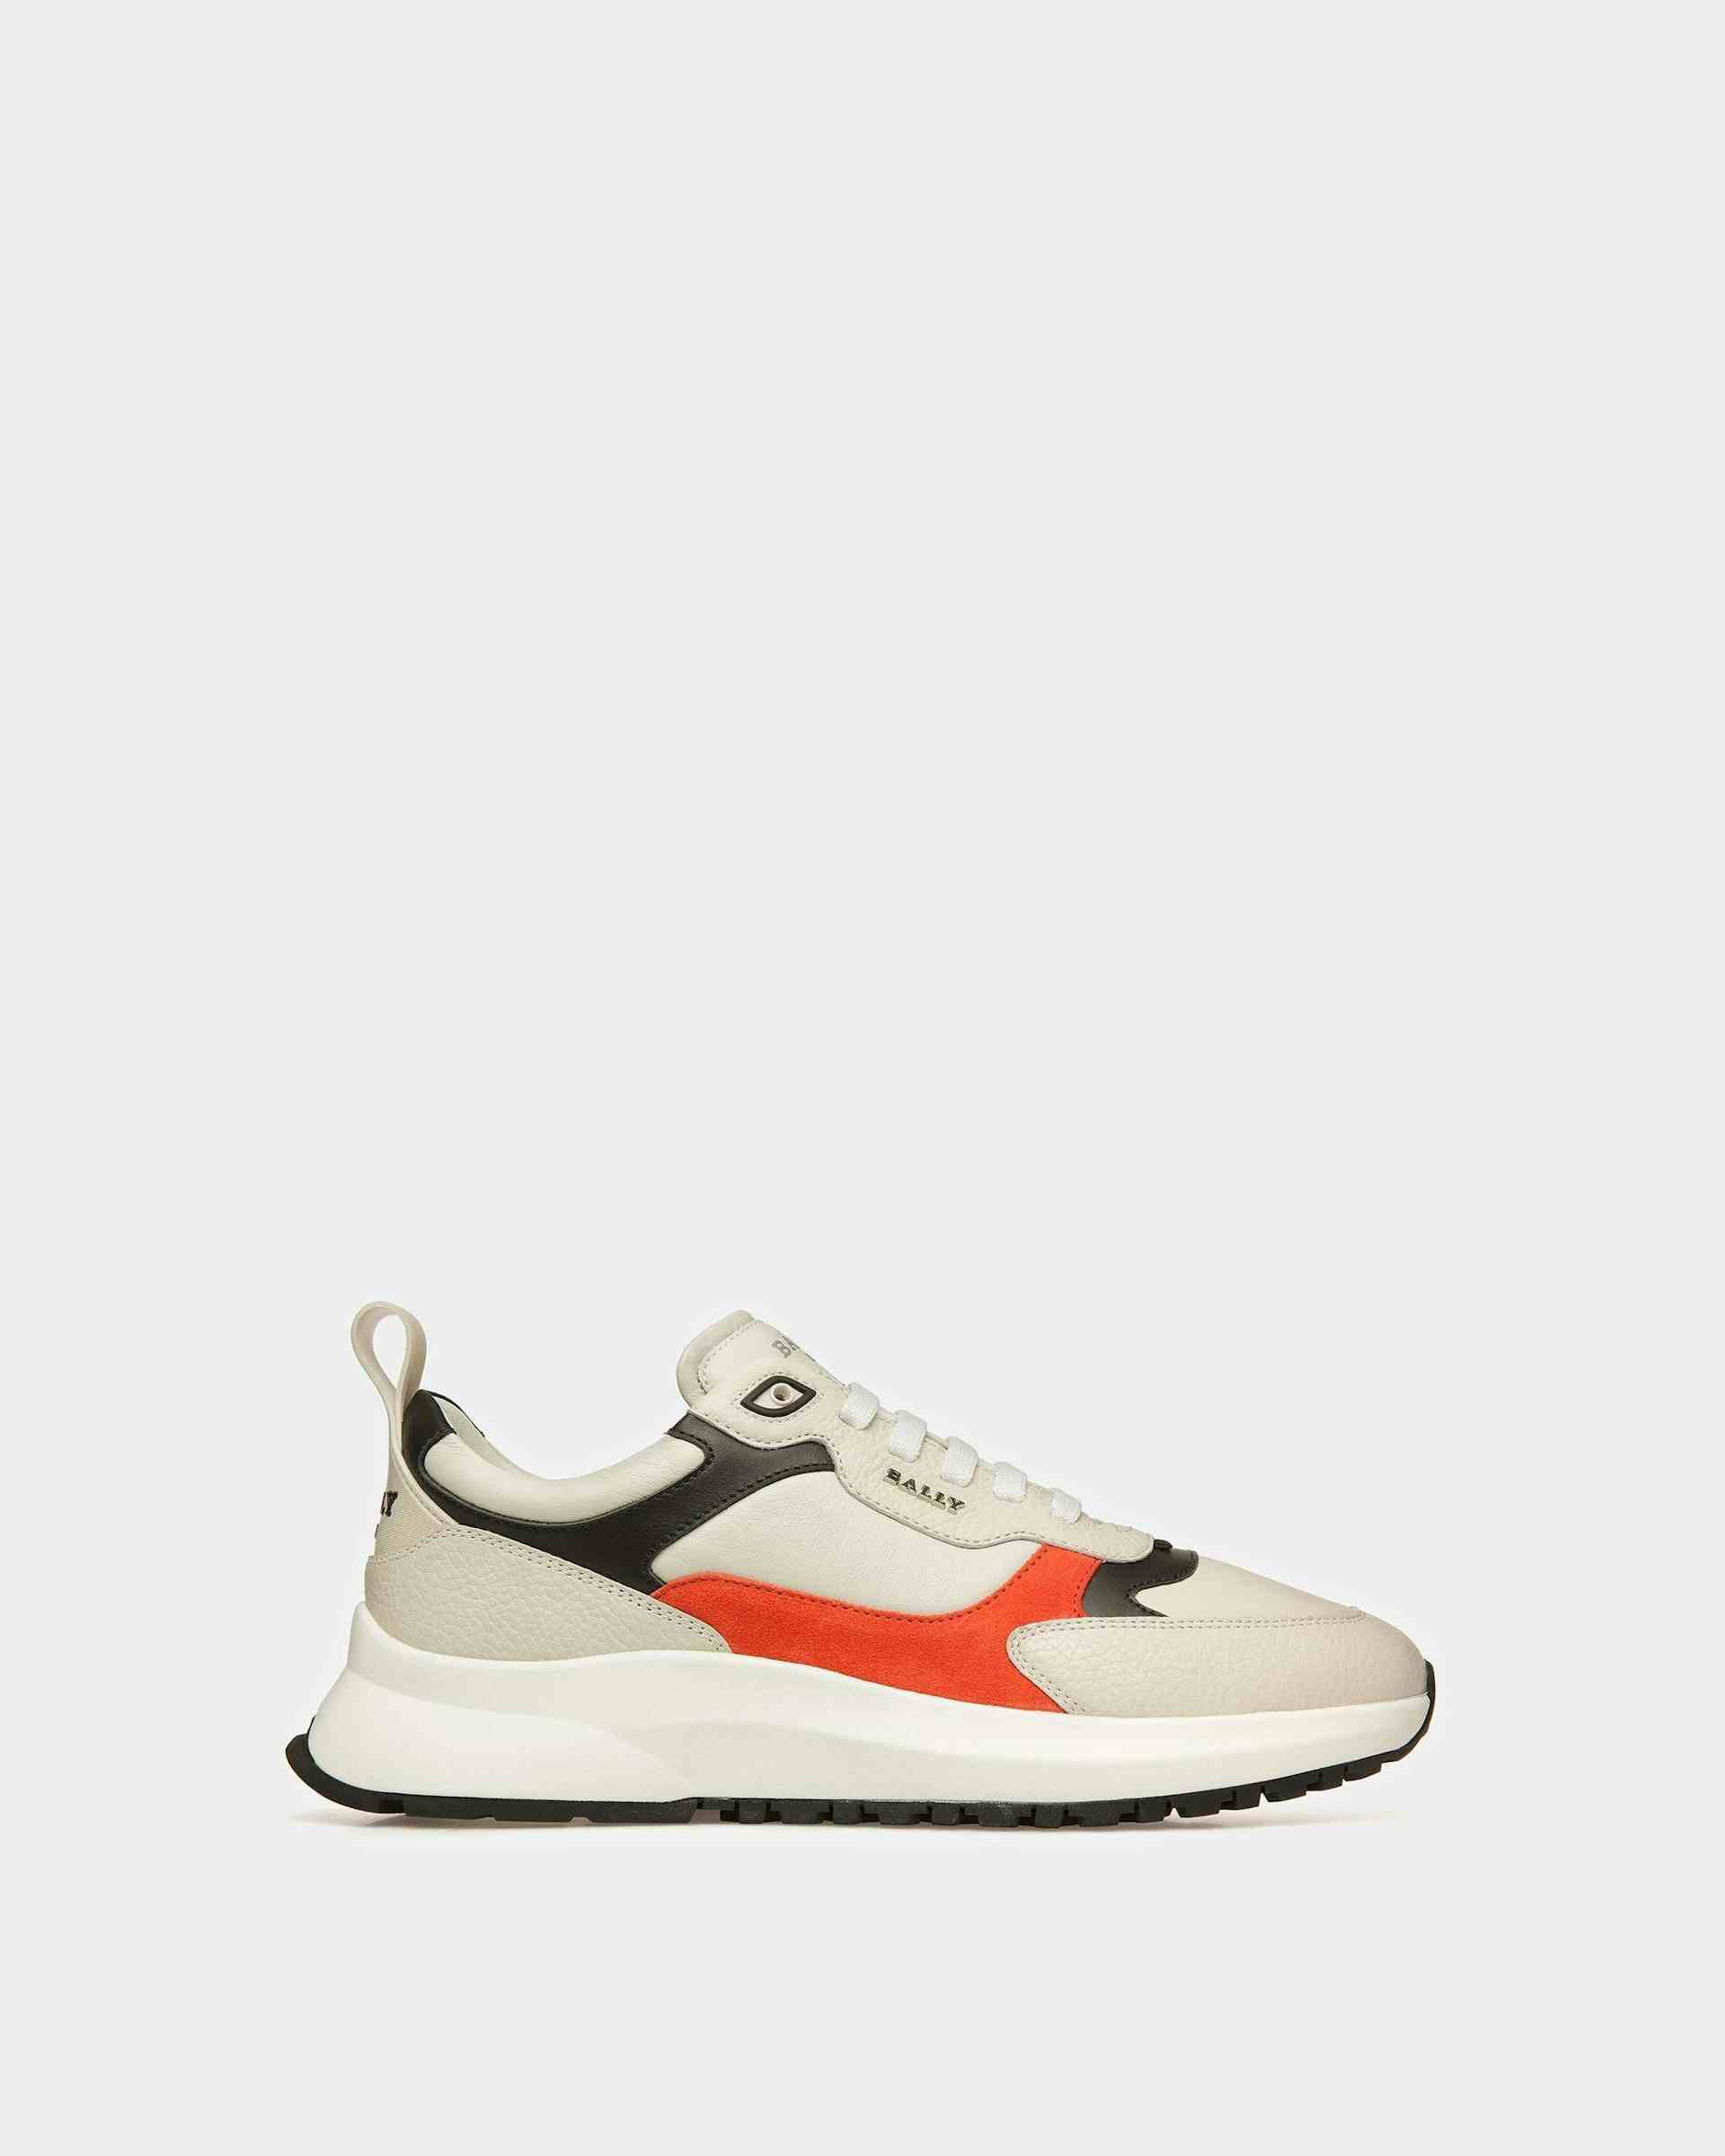 Dave Leather And Fabric Sneakers In Dusty White And Orange - Men's - Bally